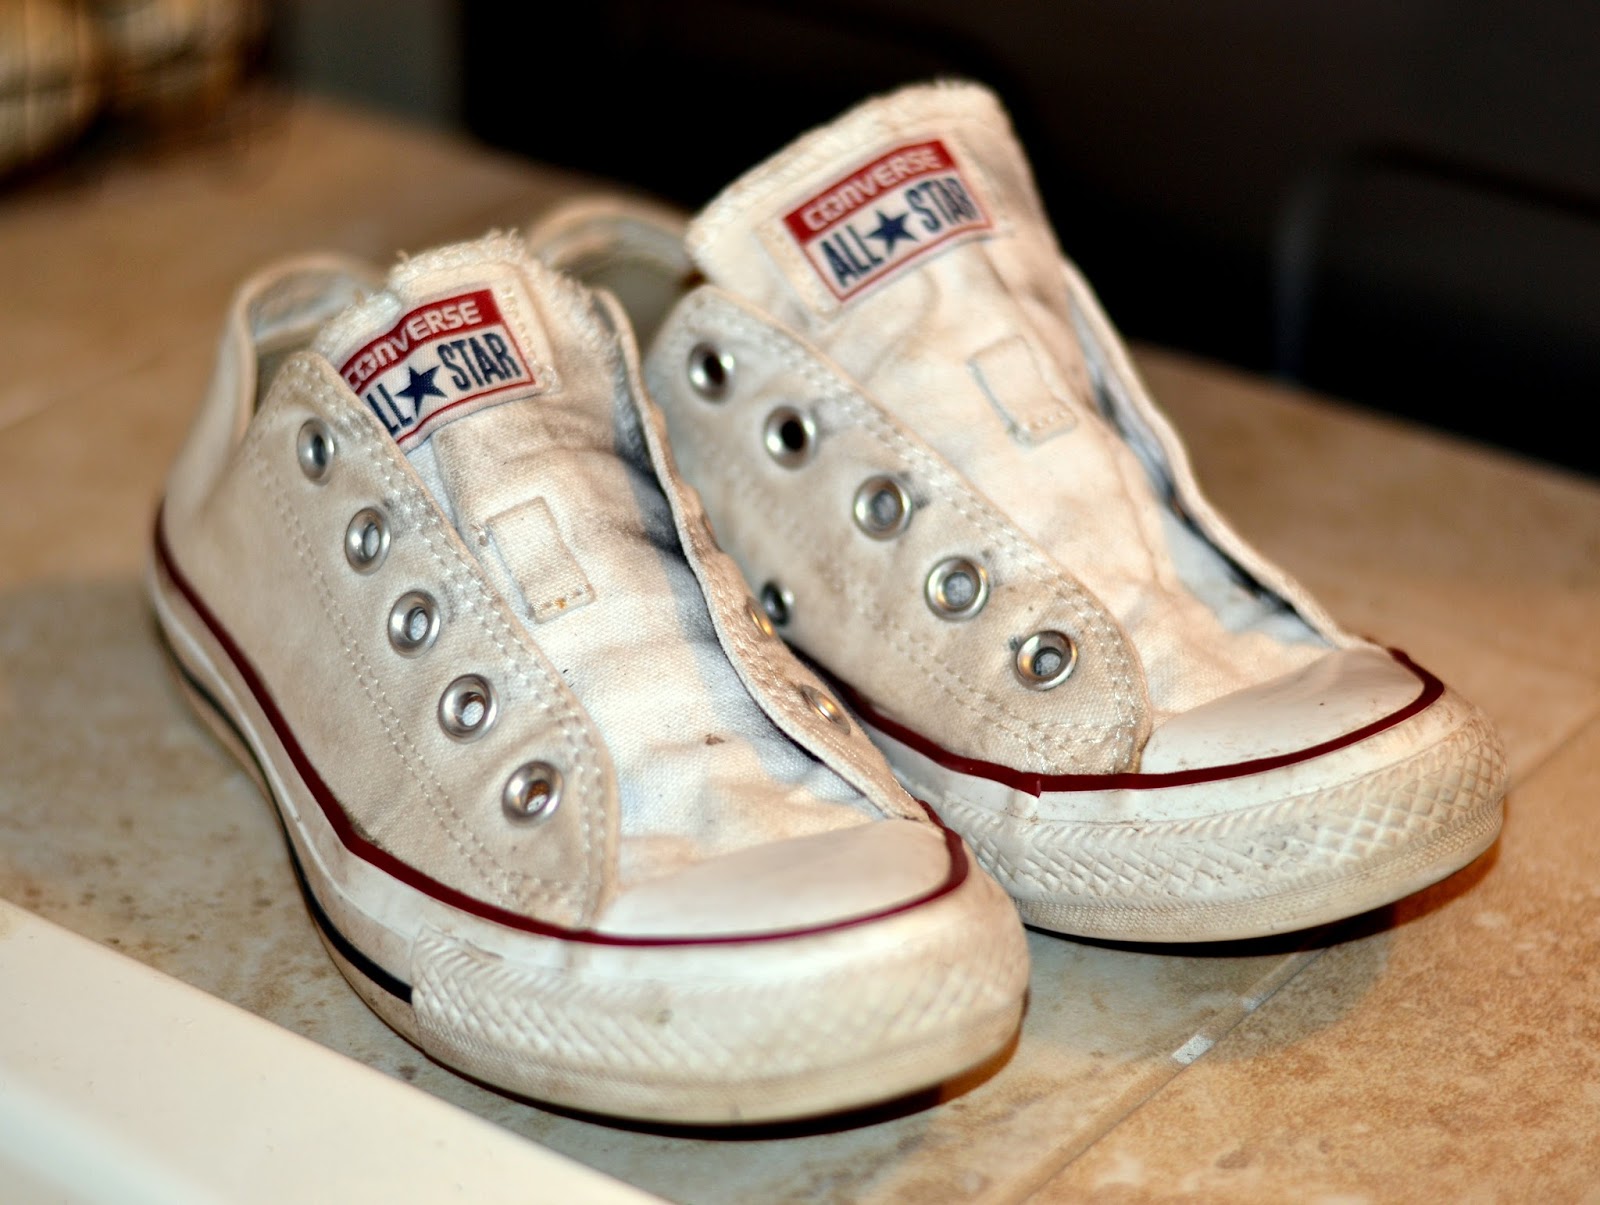 How To Wash White Converse In The Washing Machine